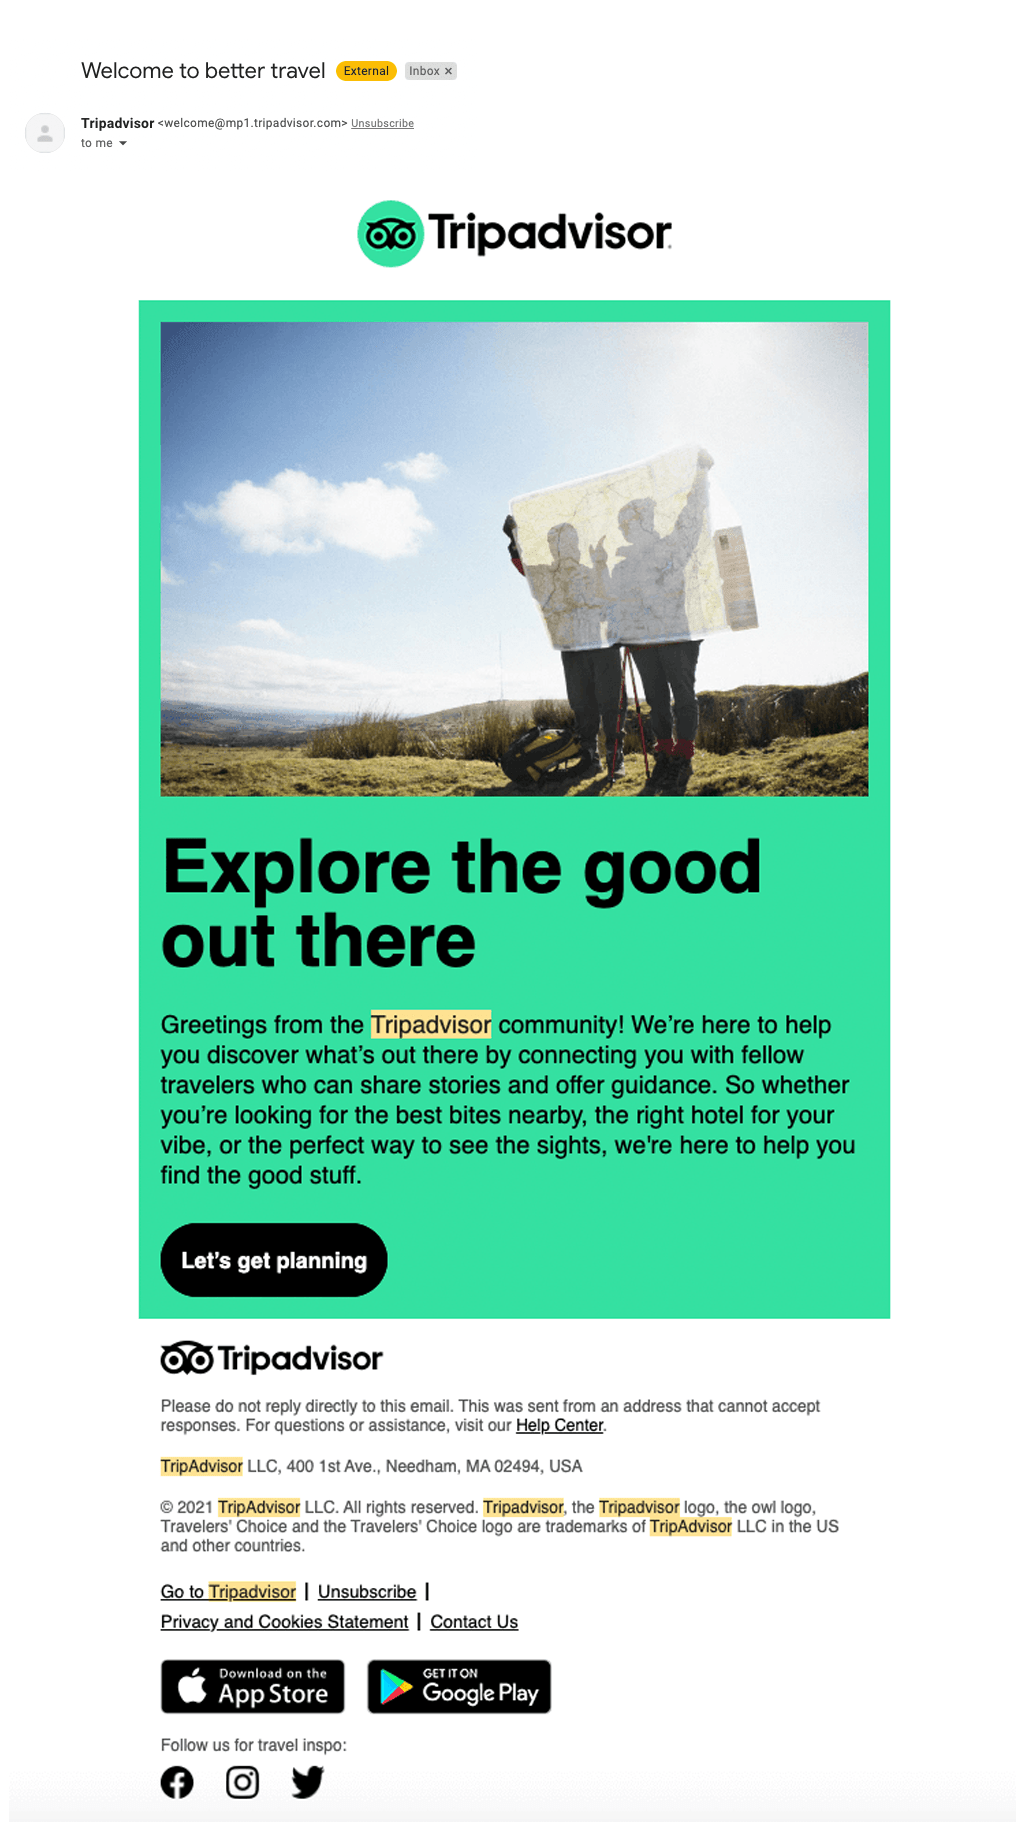 SaaS Welcome Email: Welcome email from Tripadvisor